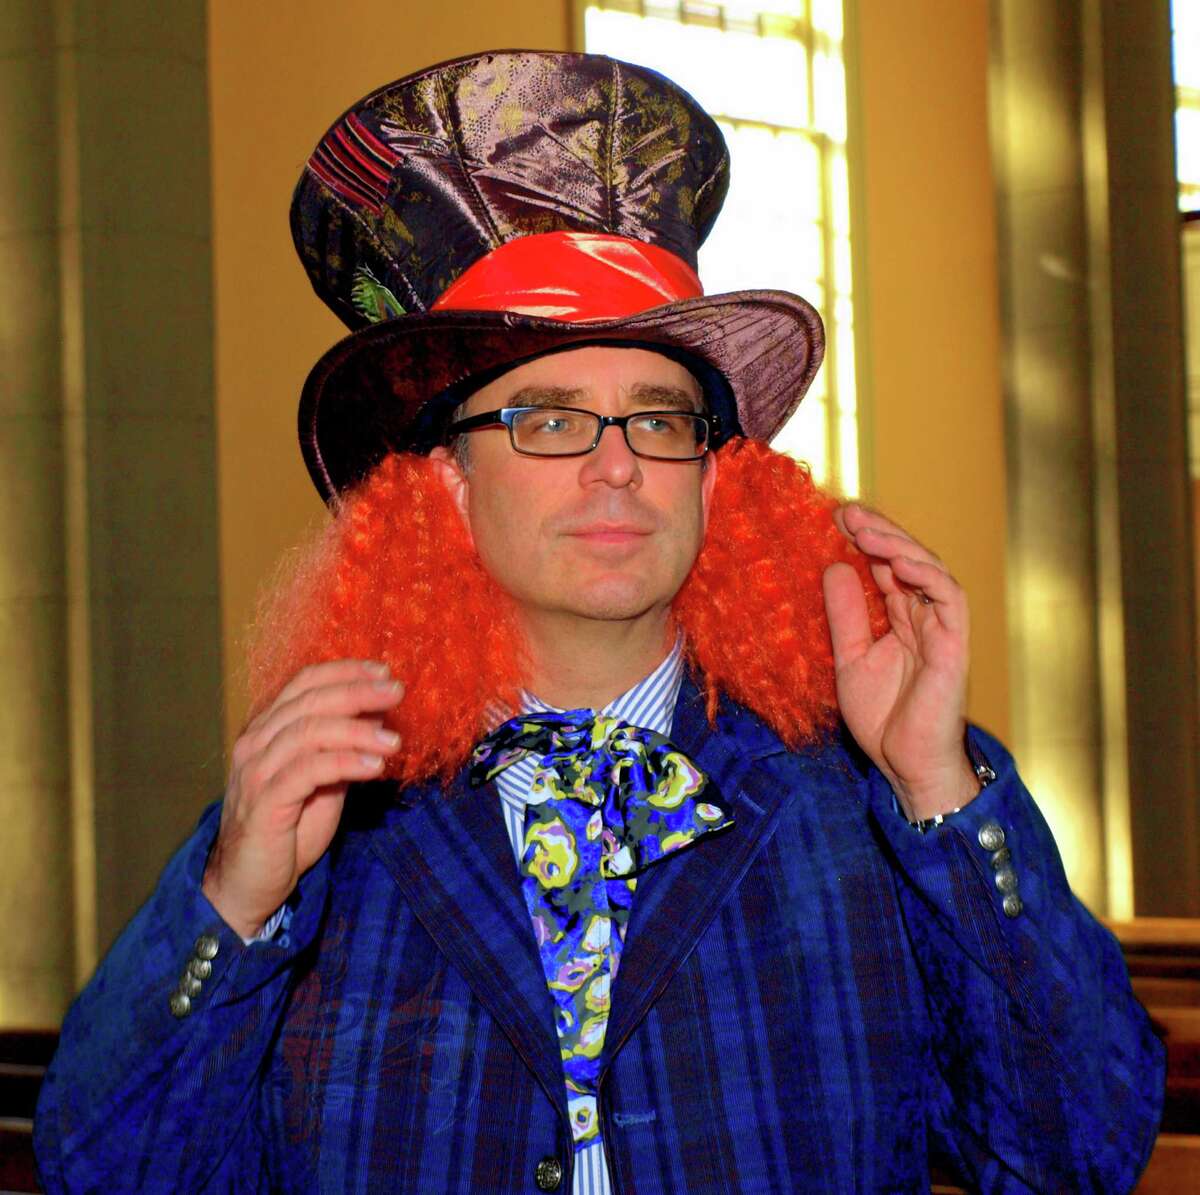 Dr. John Michniewicz will perform in costume on the pipe organ at the 11th annual "Pipescreams" Halloween Musical Extravaganza Concert Sunday, Oct. 21, in Bridgeport.